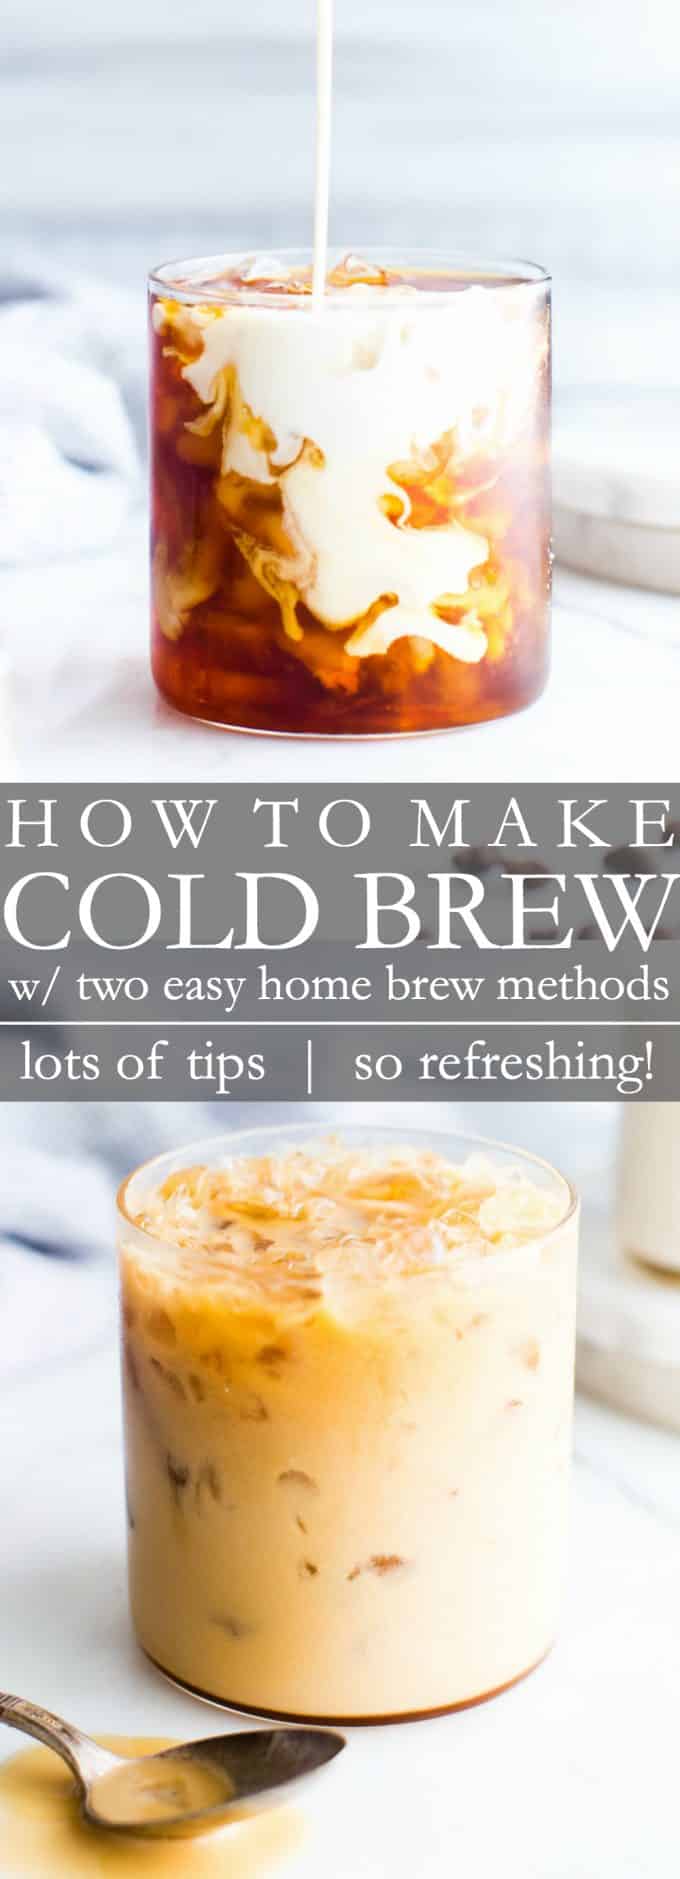 How to Make Cold Brew using a French press or using a strainer and paper filter system collage with text overlay